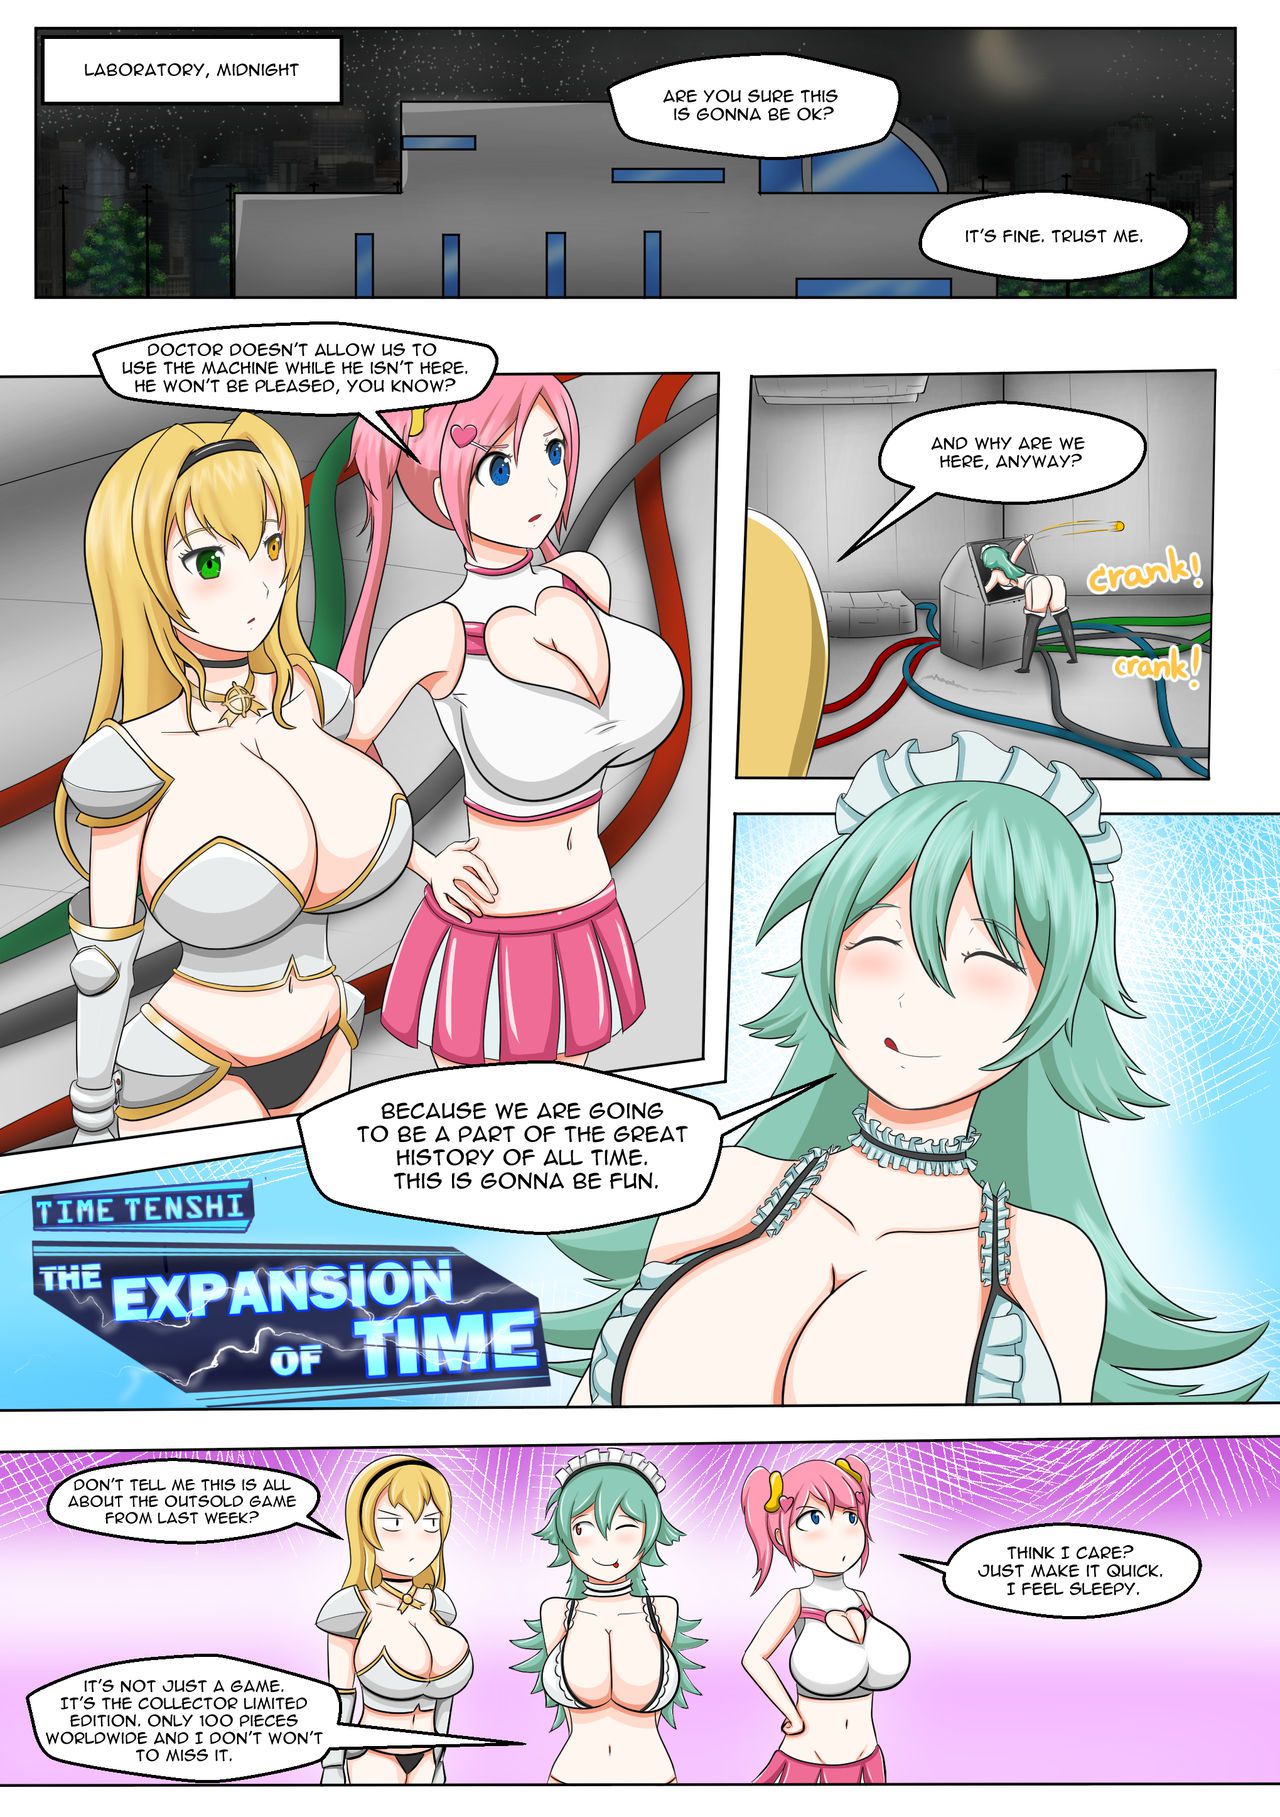 [EscapefromExpansion] The Expansion of Time 1-3 [Ongoing] 2